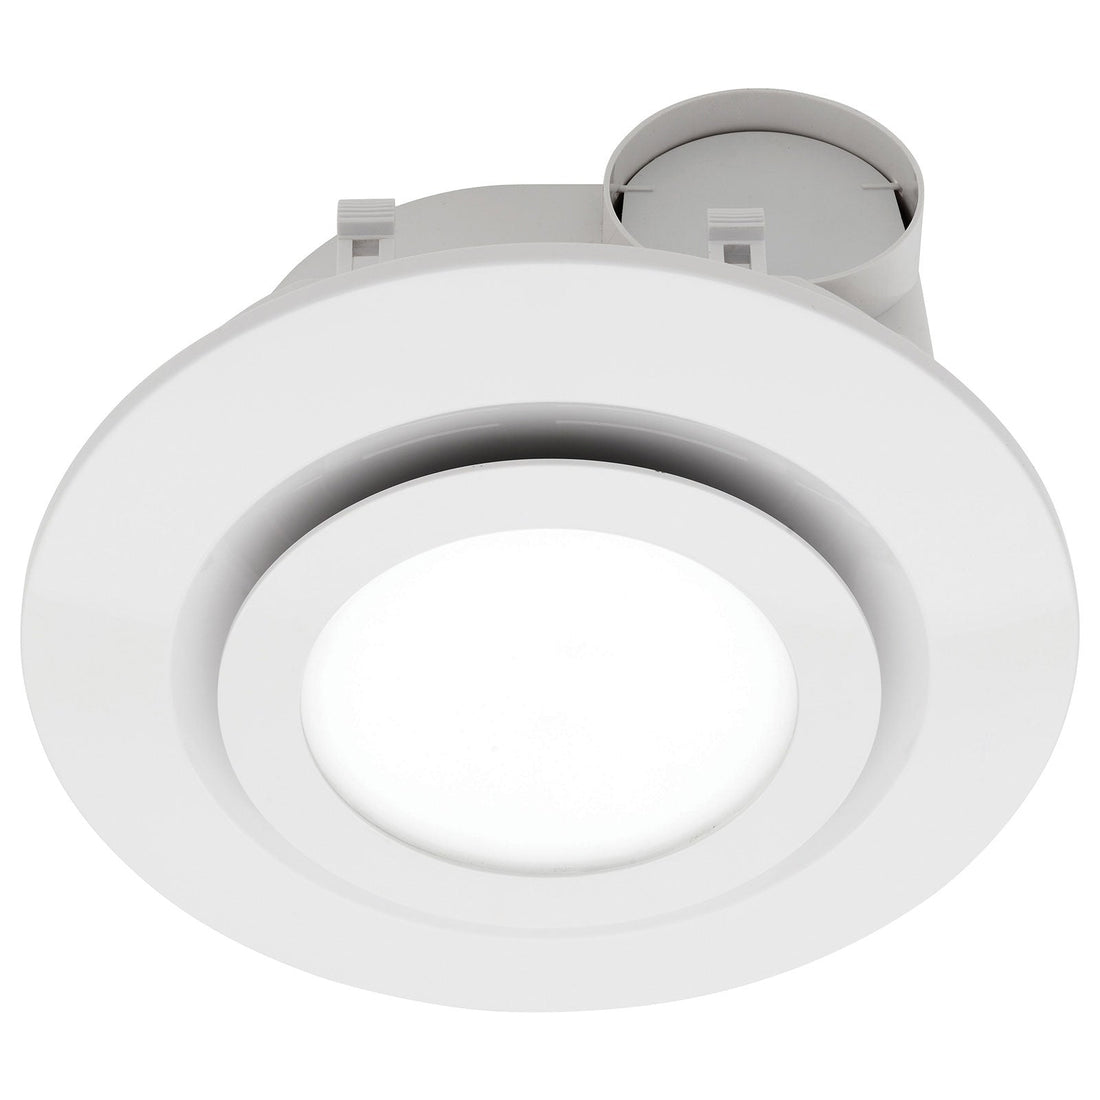 Starline Round Exhaust Fan with LED Light Mercator